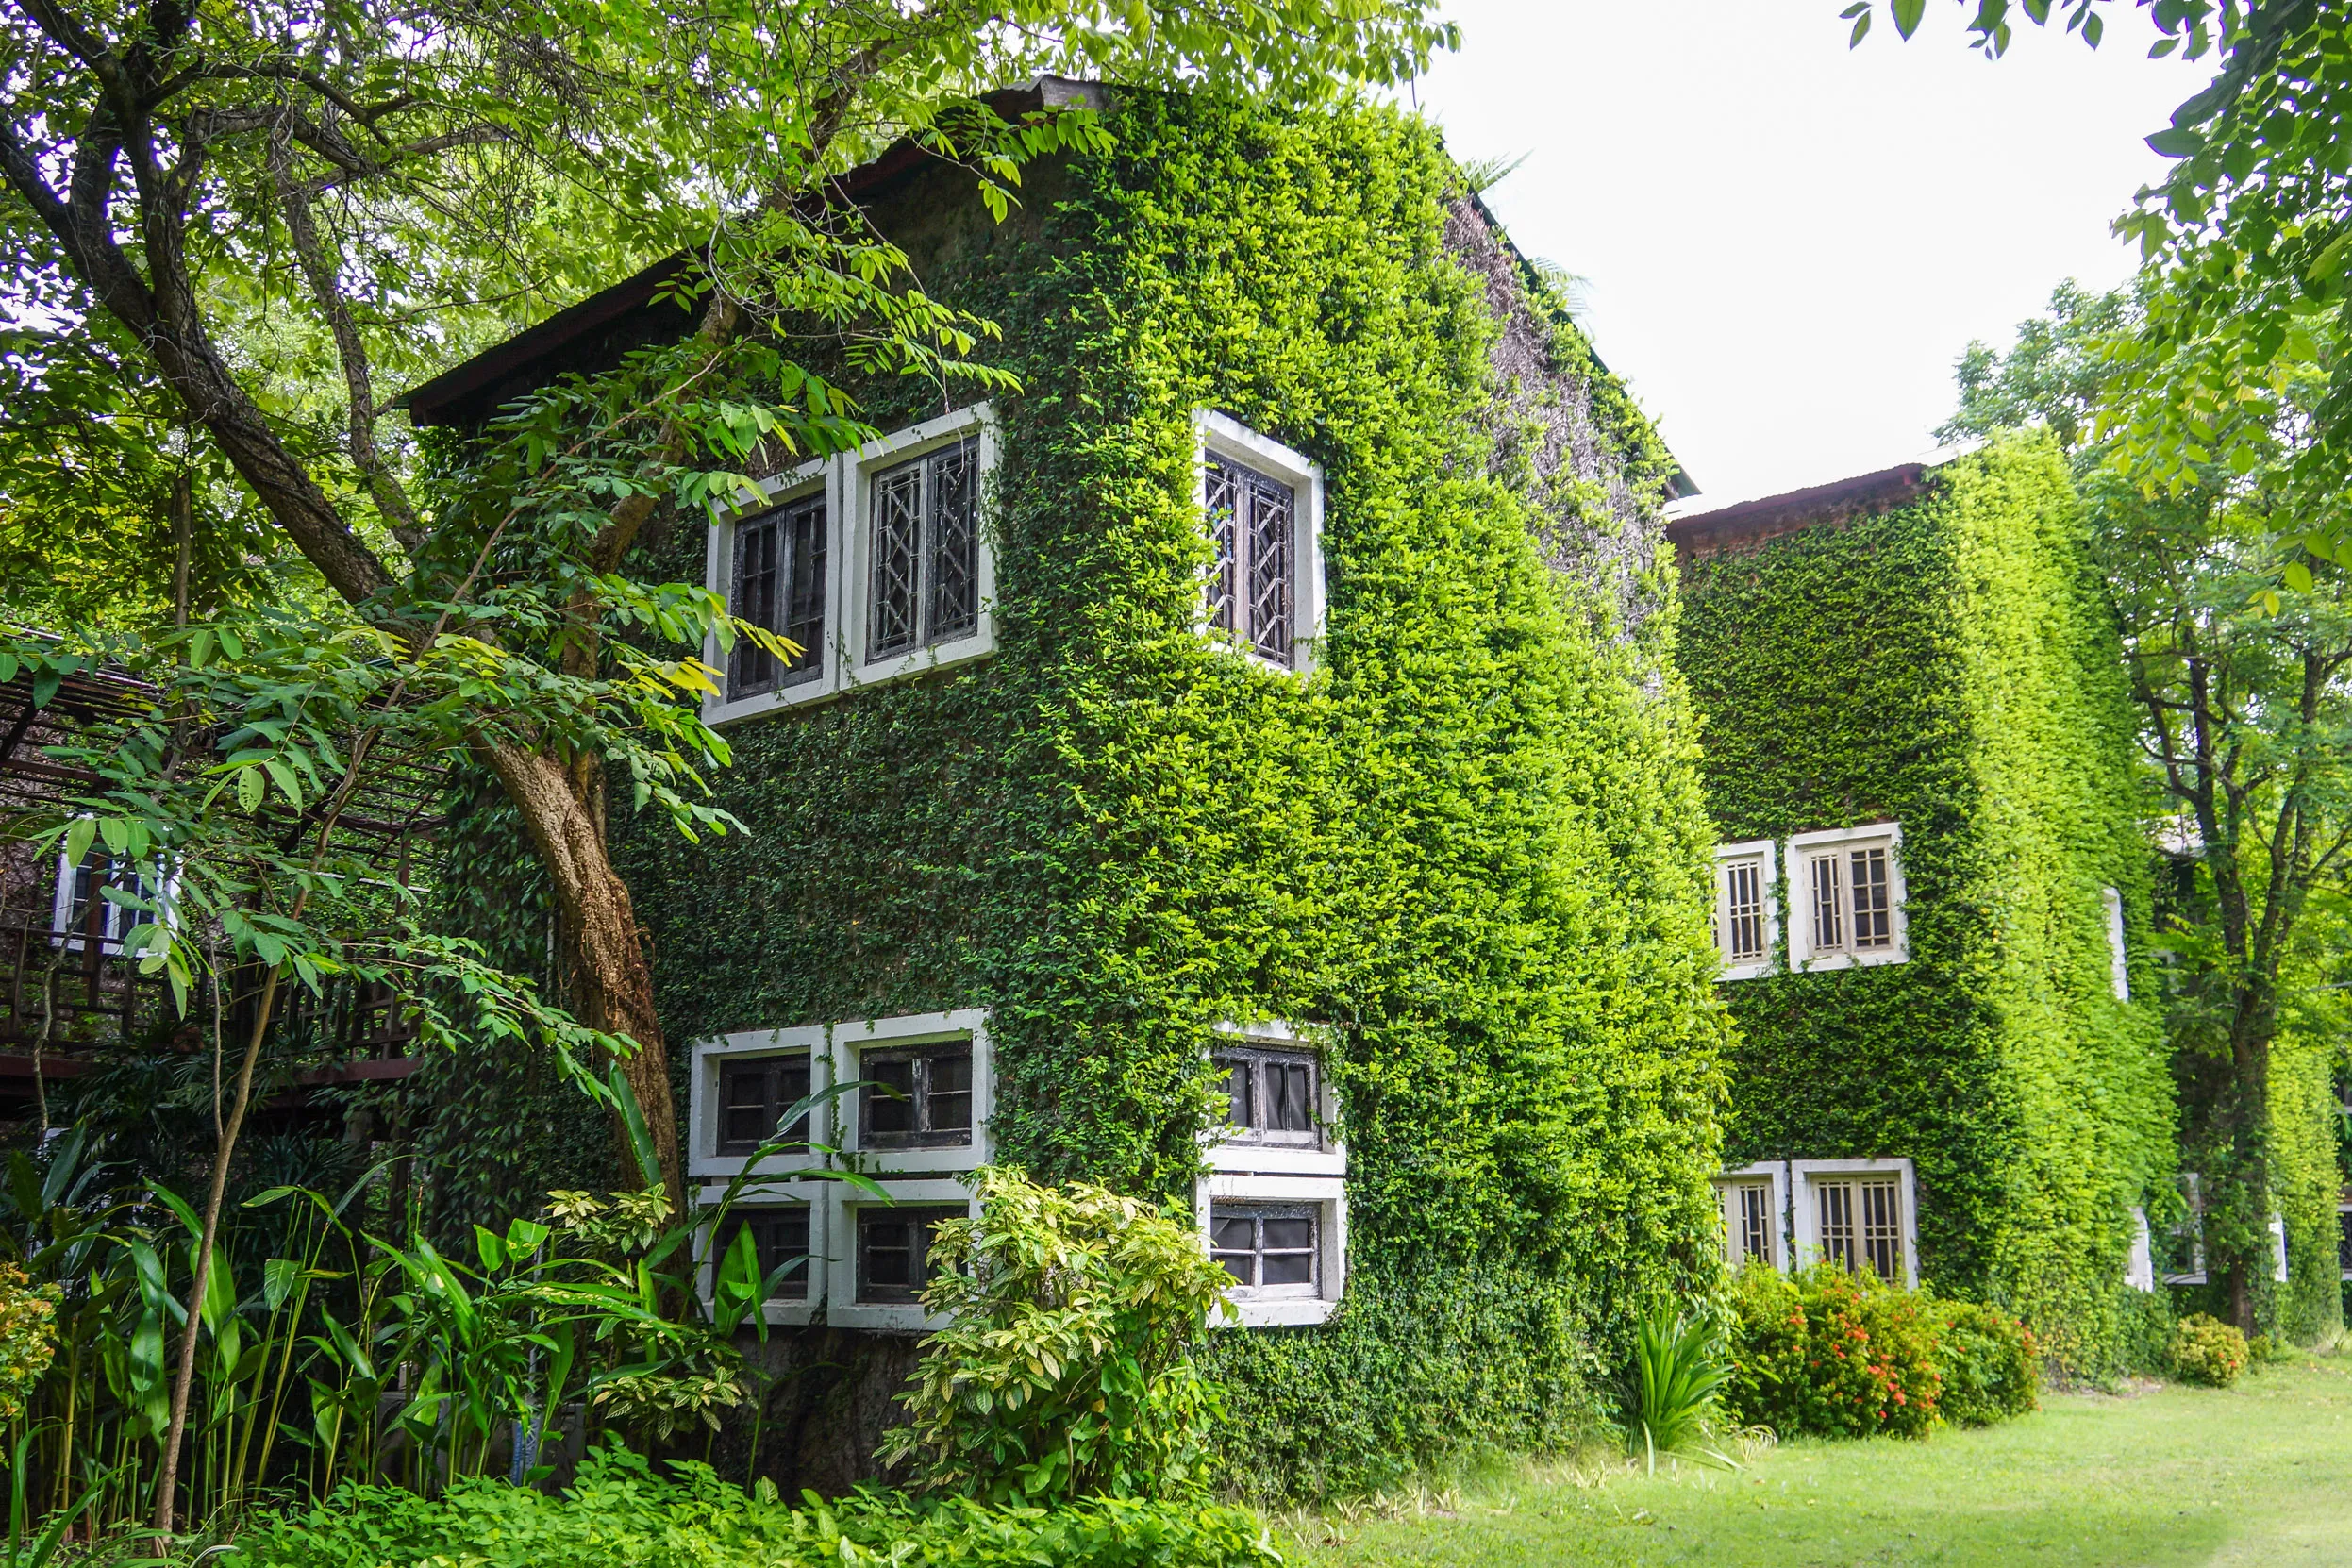 A two storey building entirely covered by ivy, with only the windows breaking the blanket of greenery.